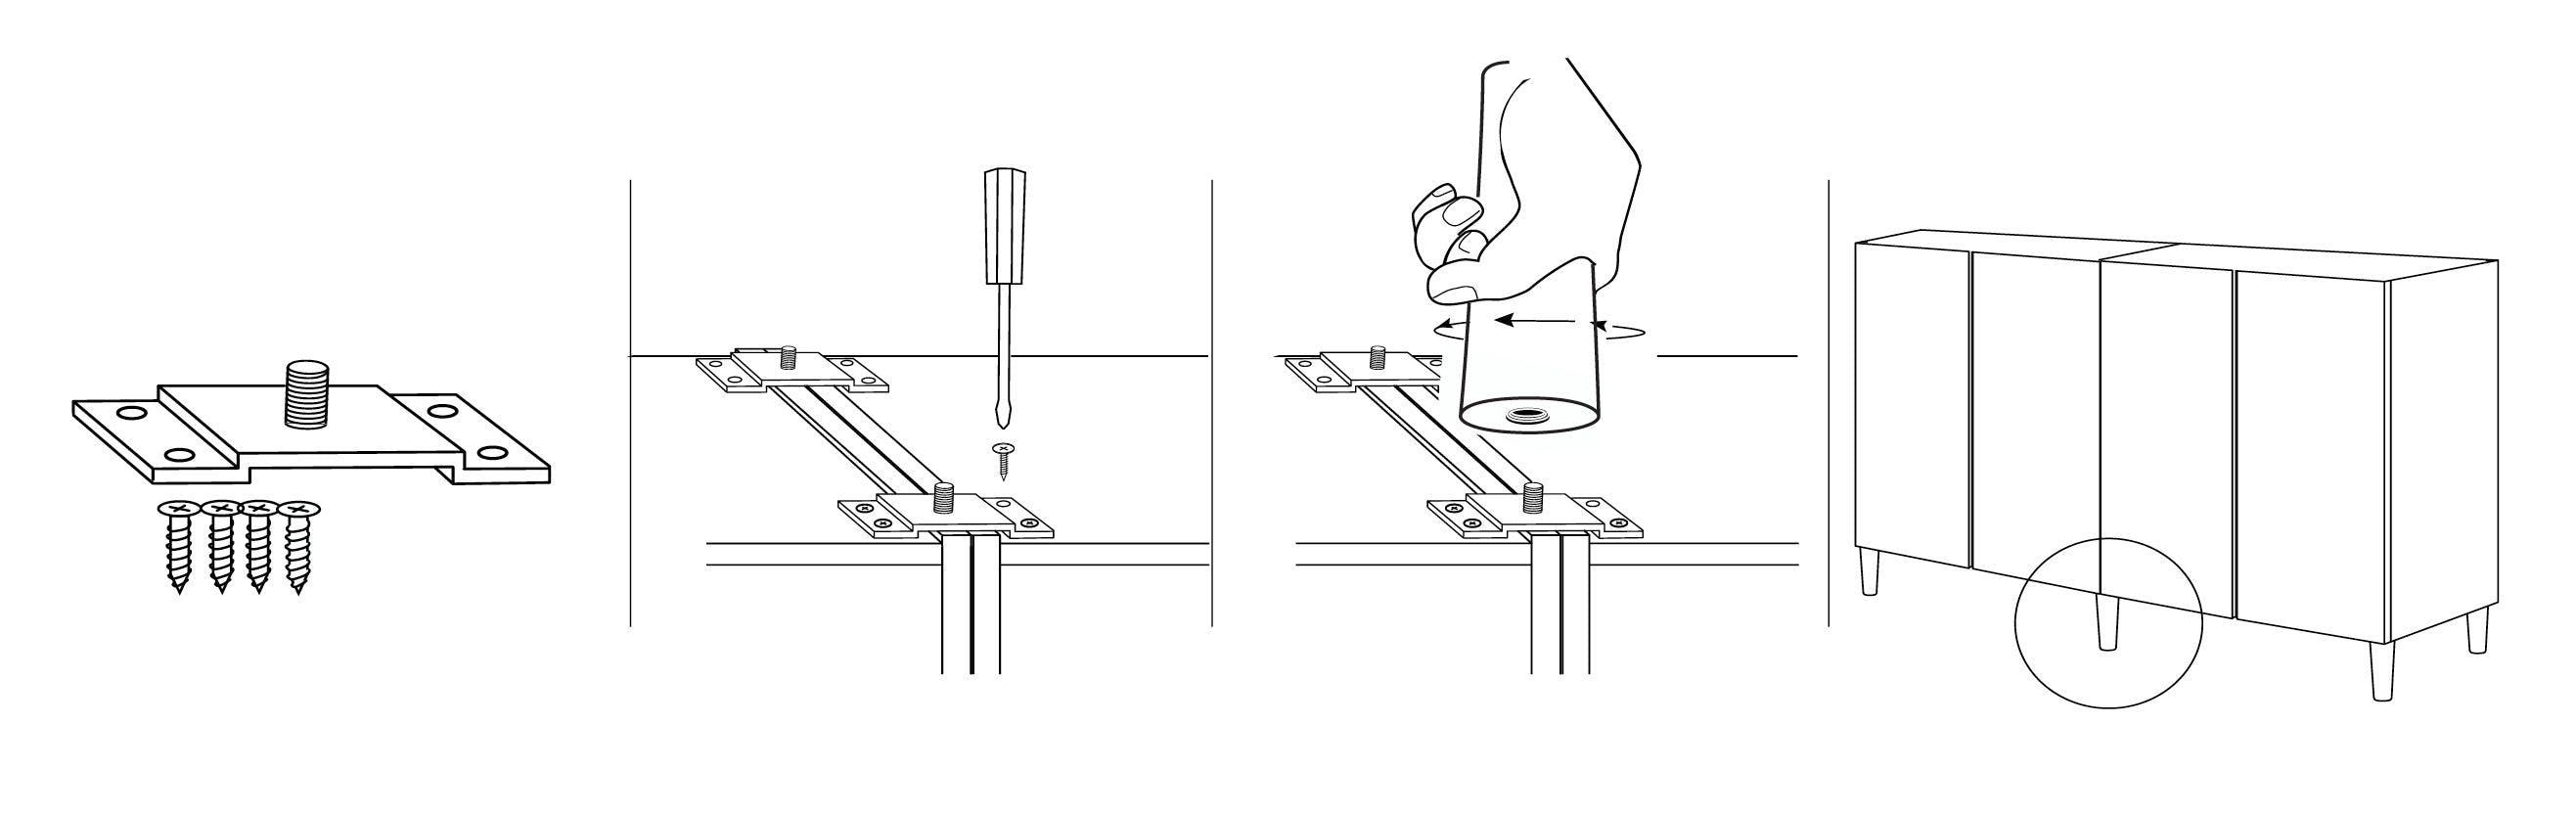 Mounting instruction for Ivar connecting plate